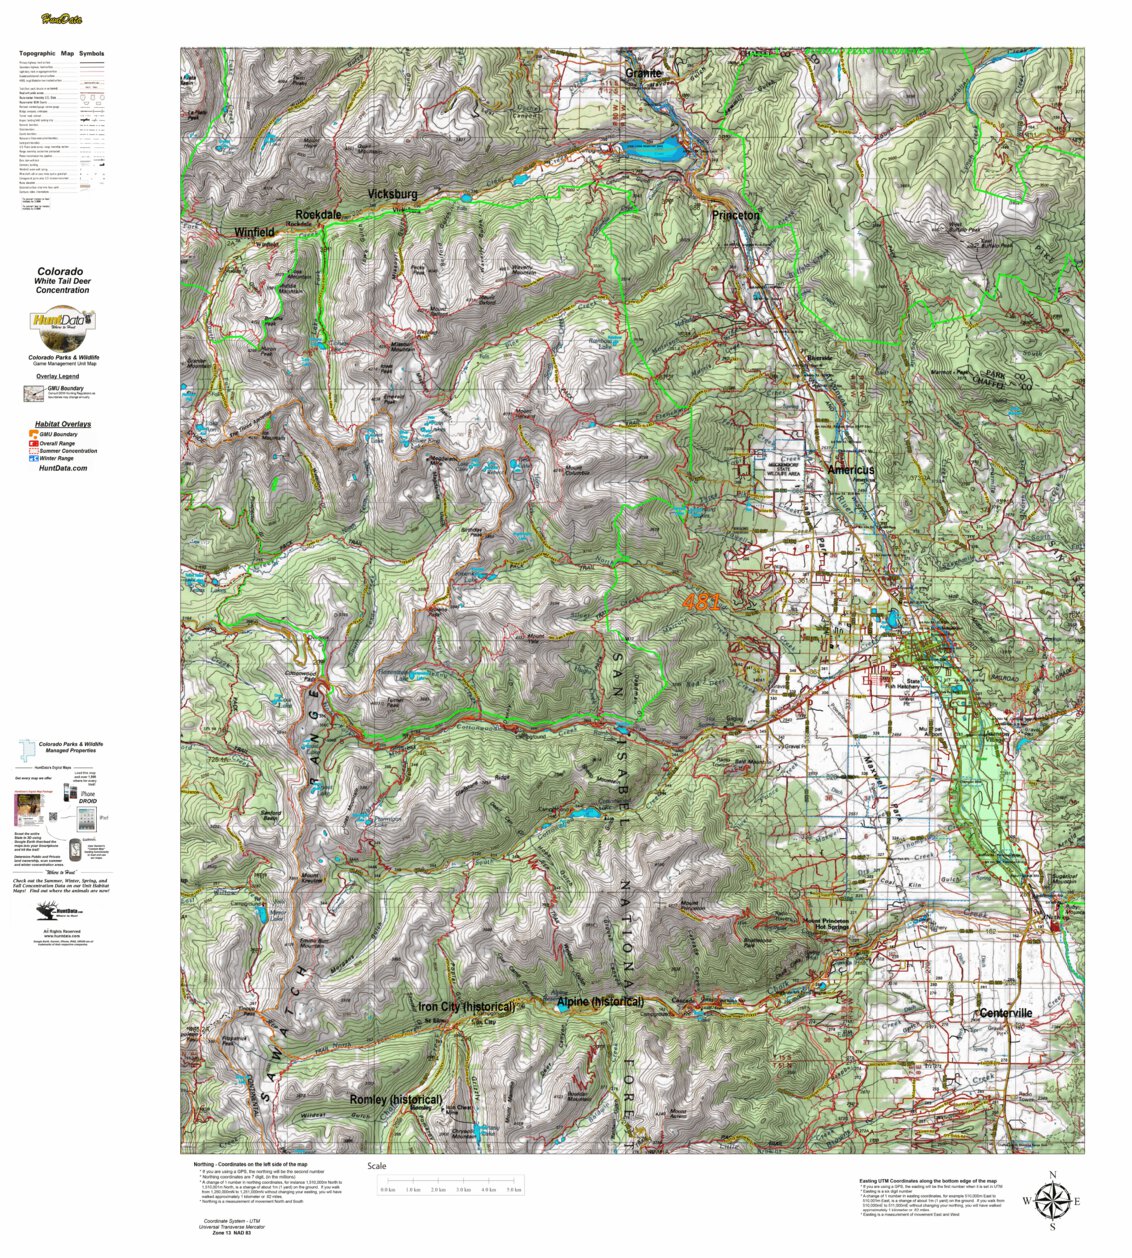 CO_481_White_Tail_Deer_Habitat map by Colorado HuntData LLC - Avenza Maps